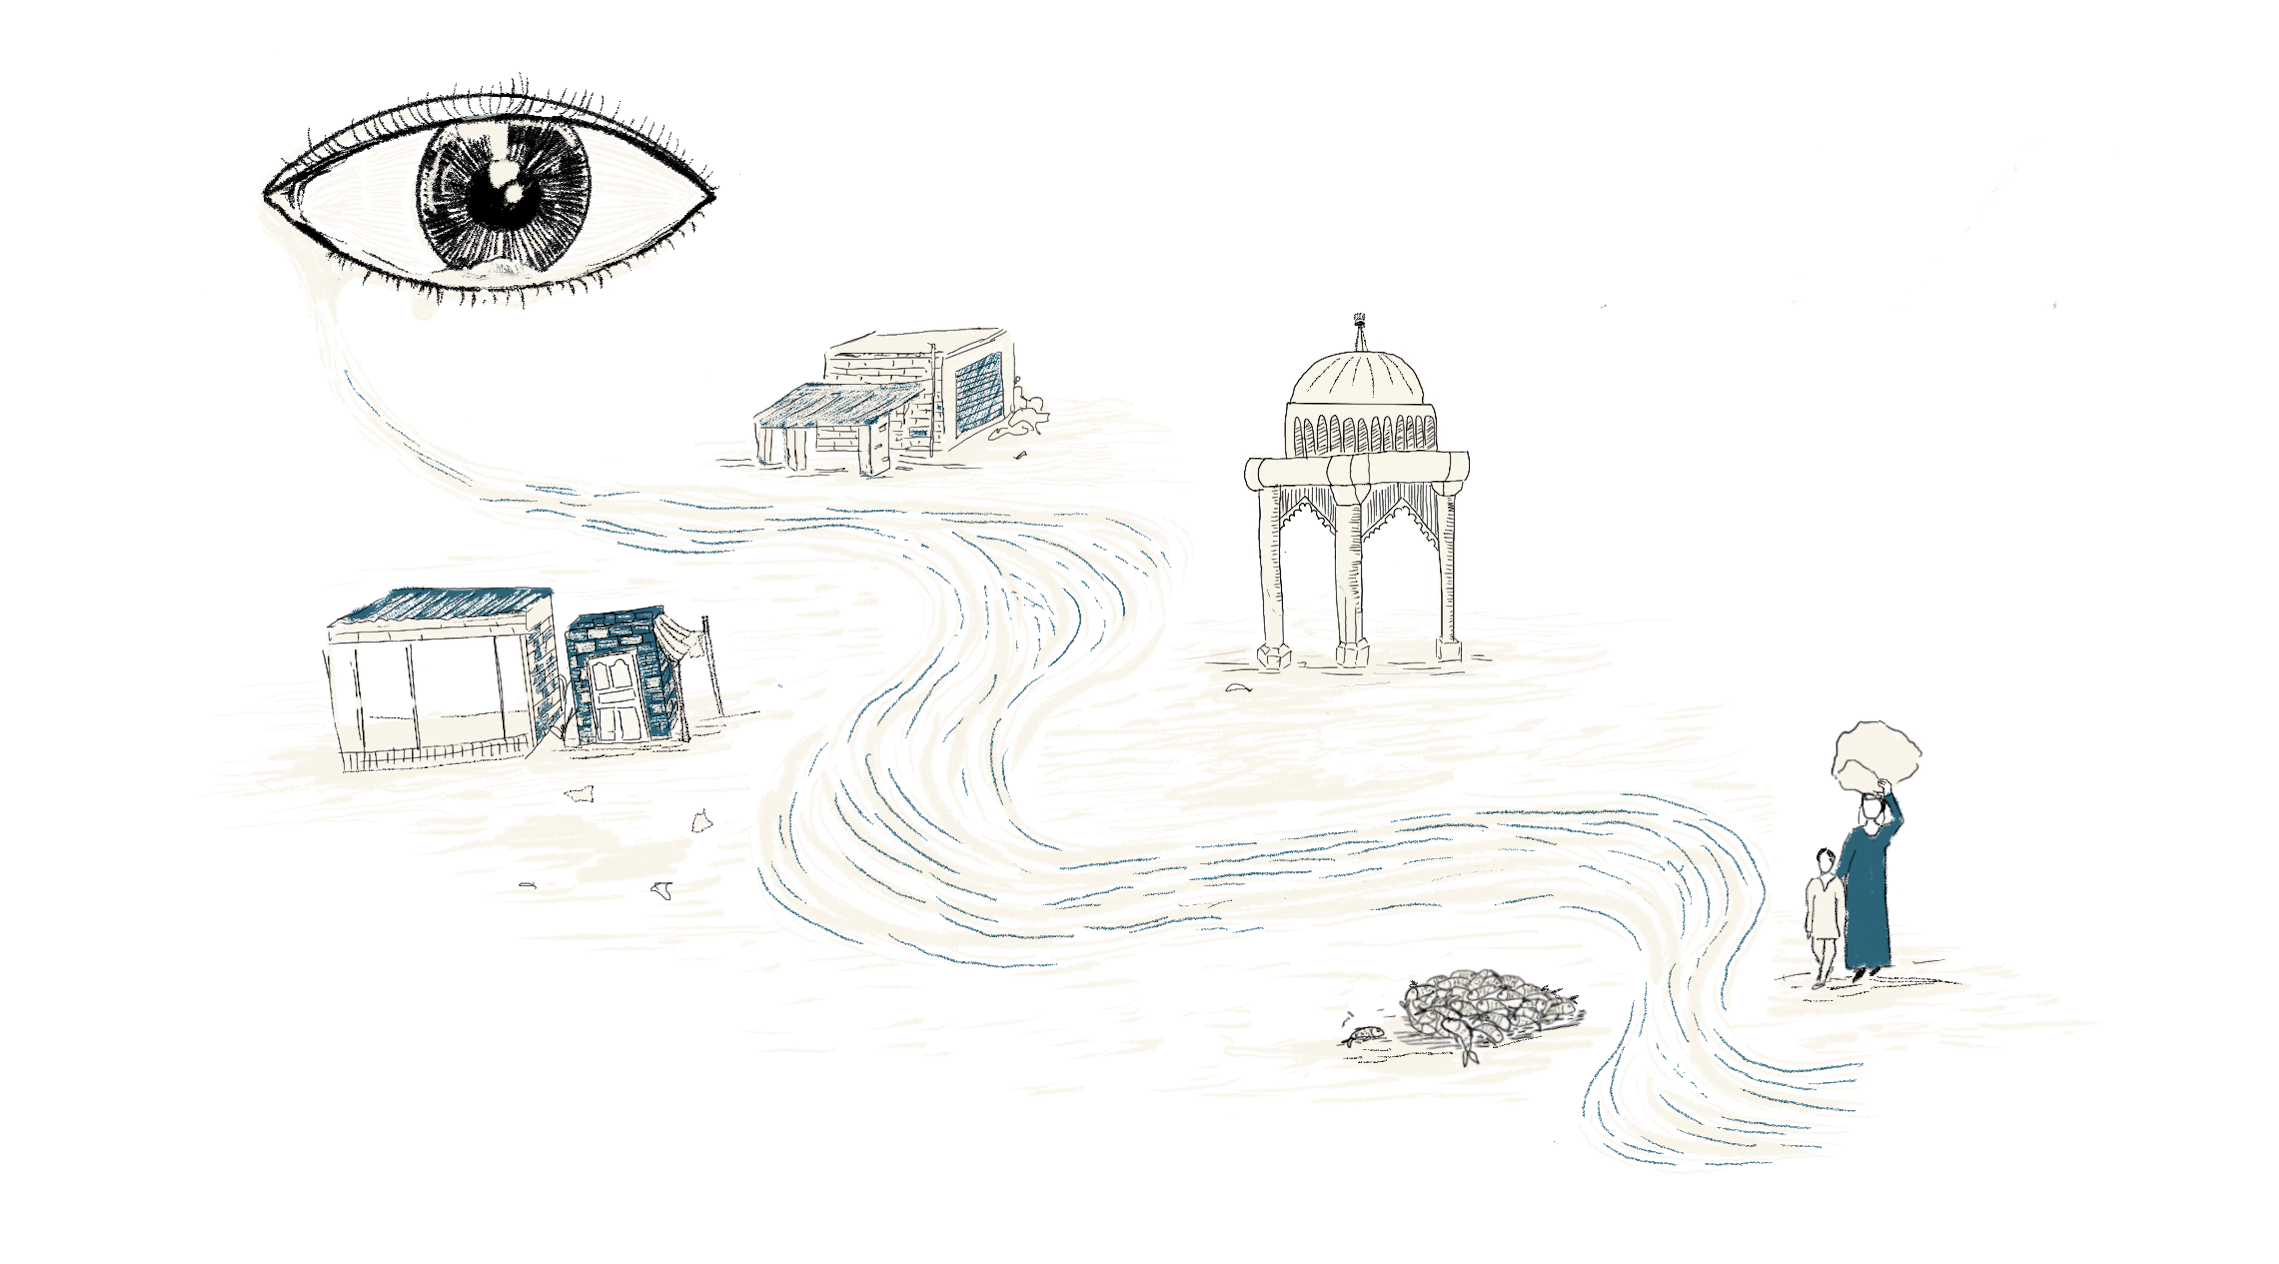 Rivers by Zuhaib Ahmed Pirzada; Illustration by Jerusha Isaac for FiftyTwo.in